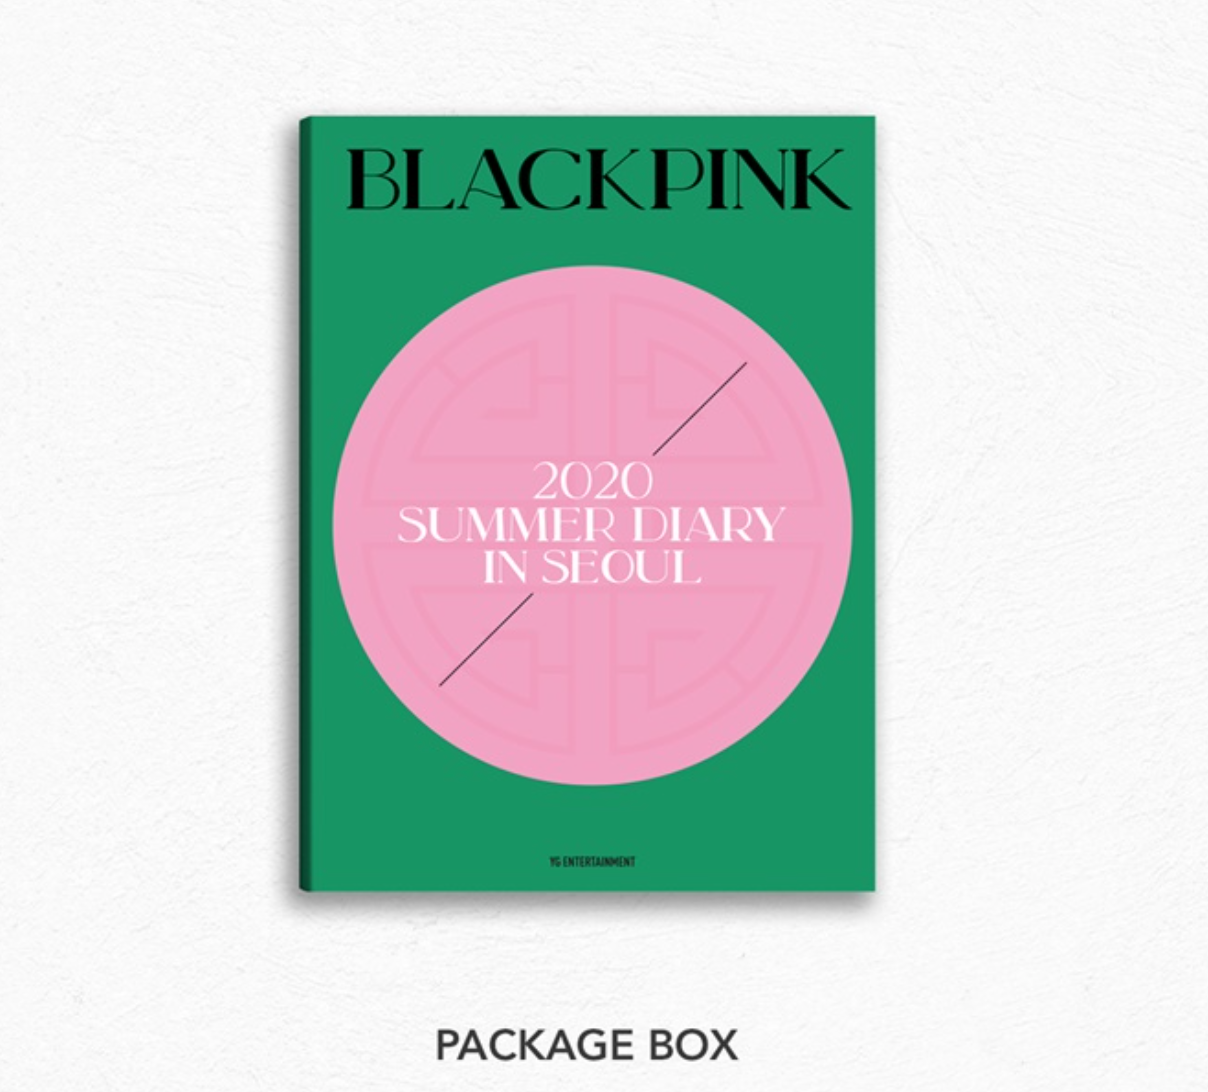 BLACKPINK SUMMER DIARY IN SEOUL 2020